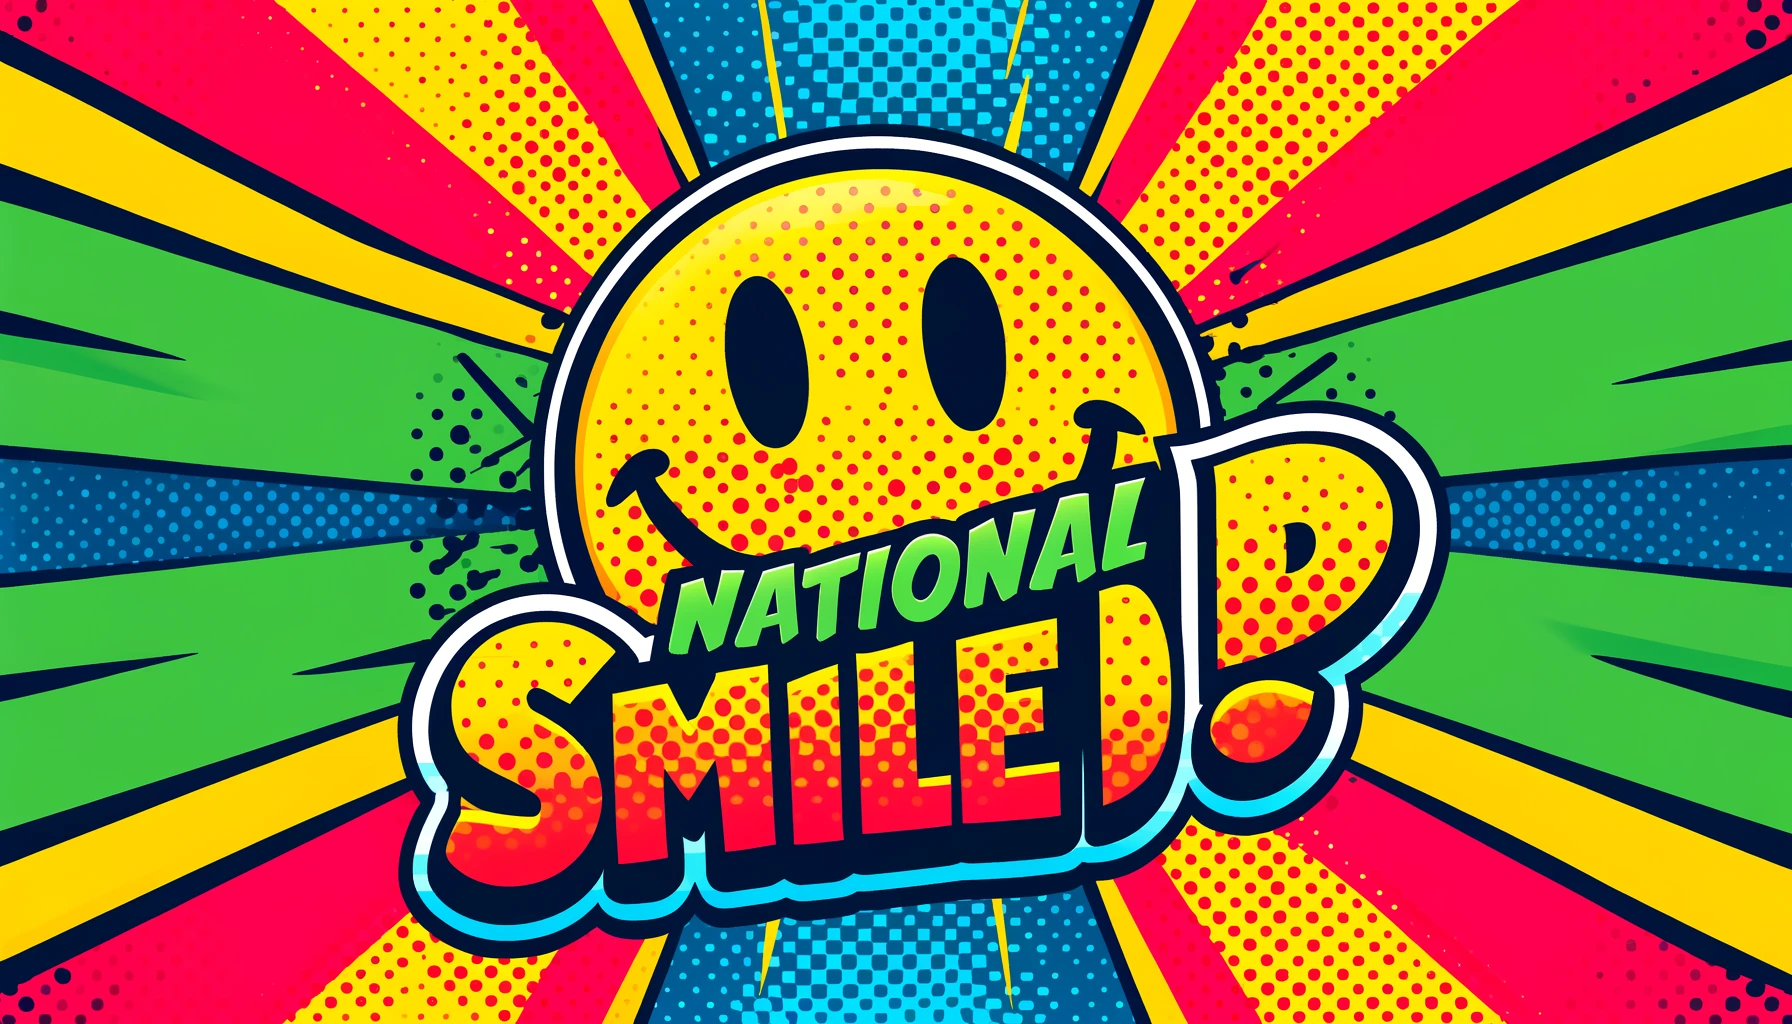 Bright National Smile Day Wishes to Light Up Your Day